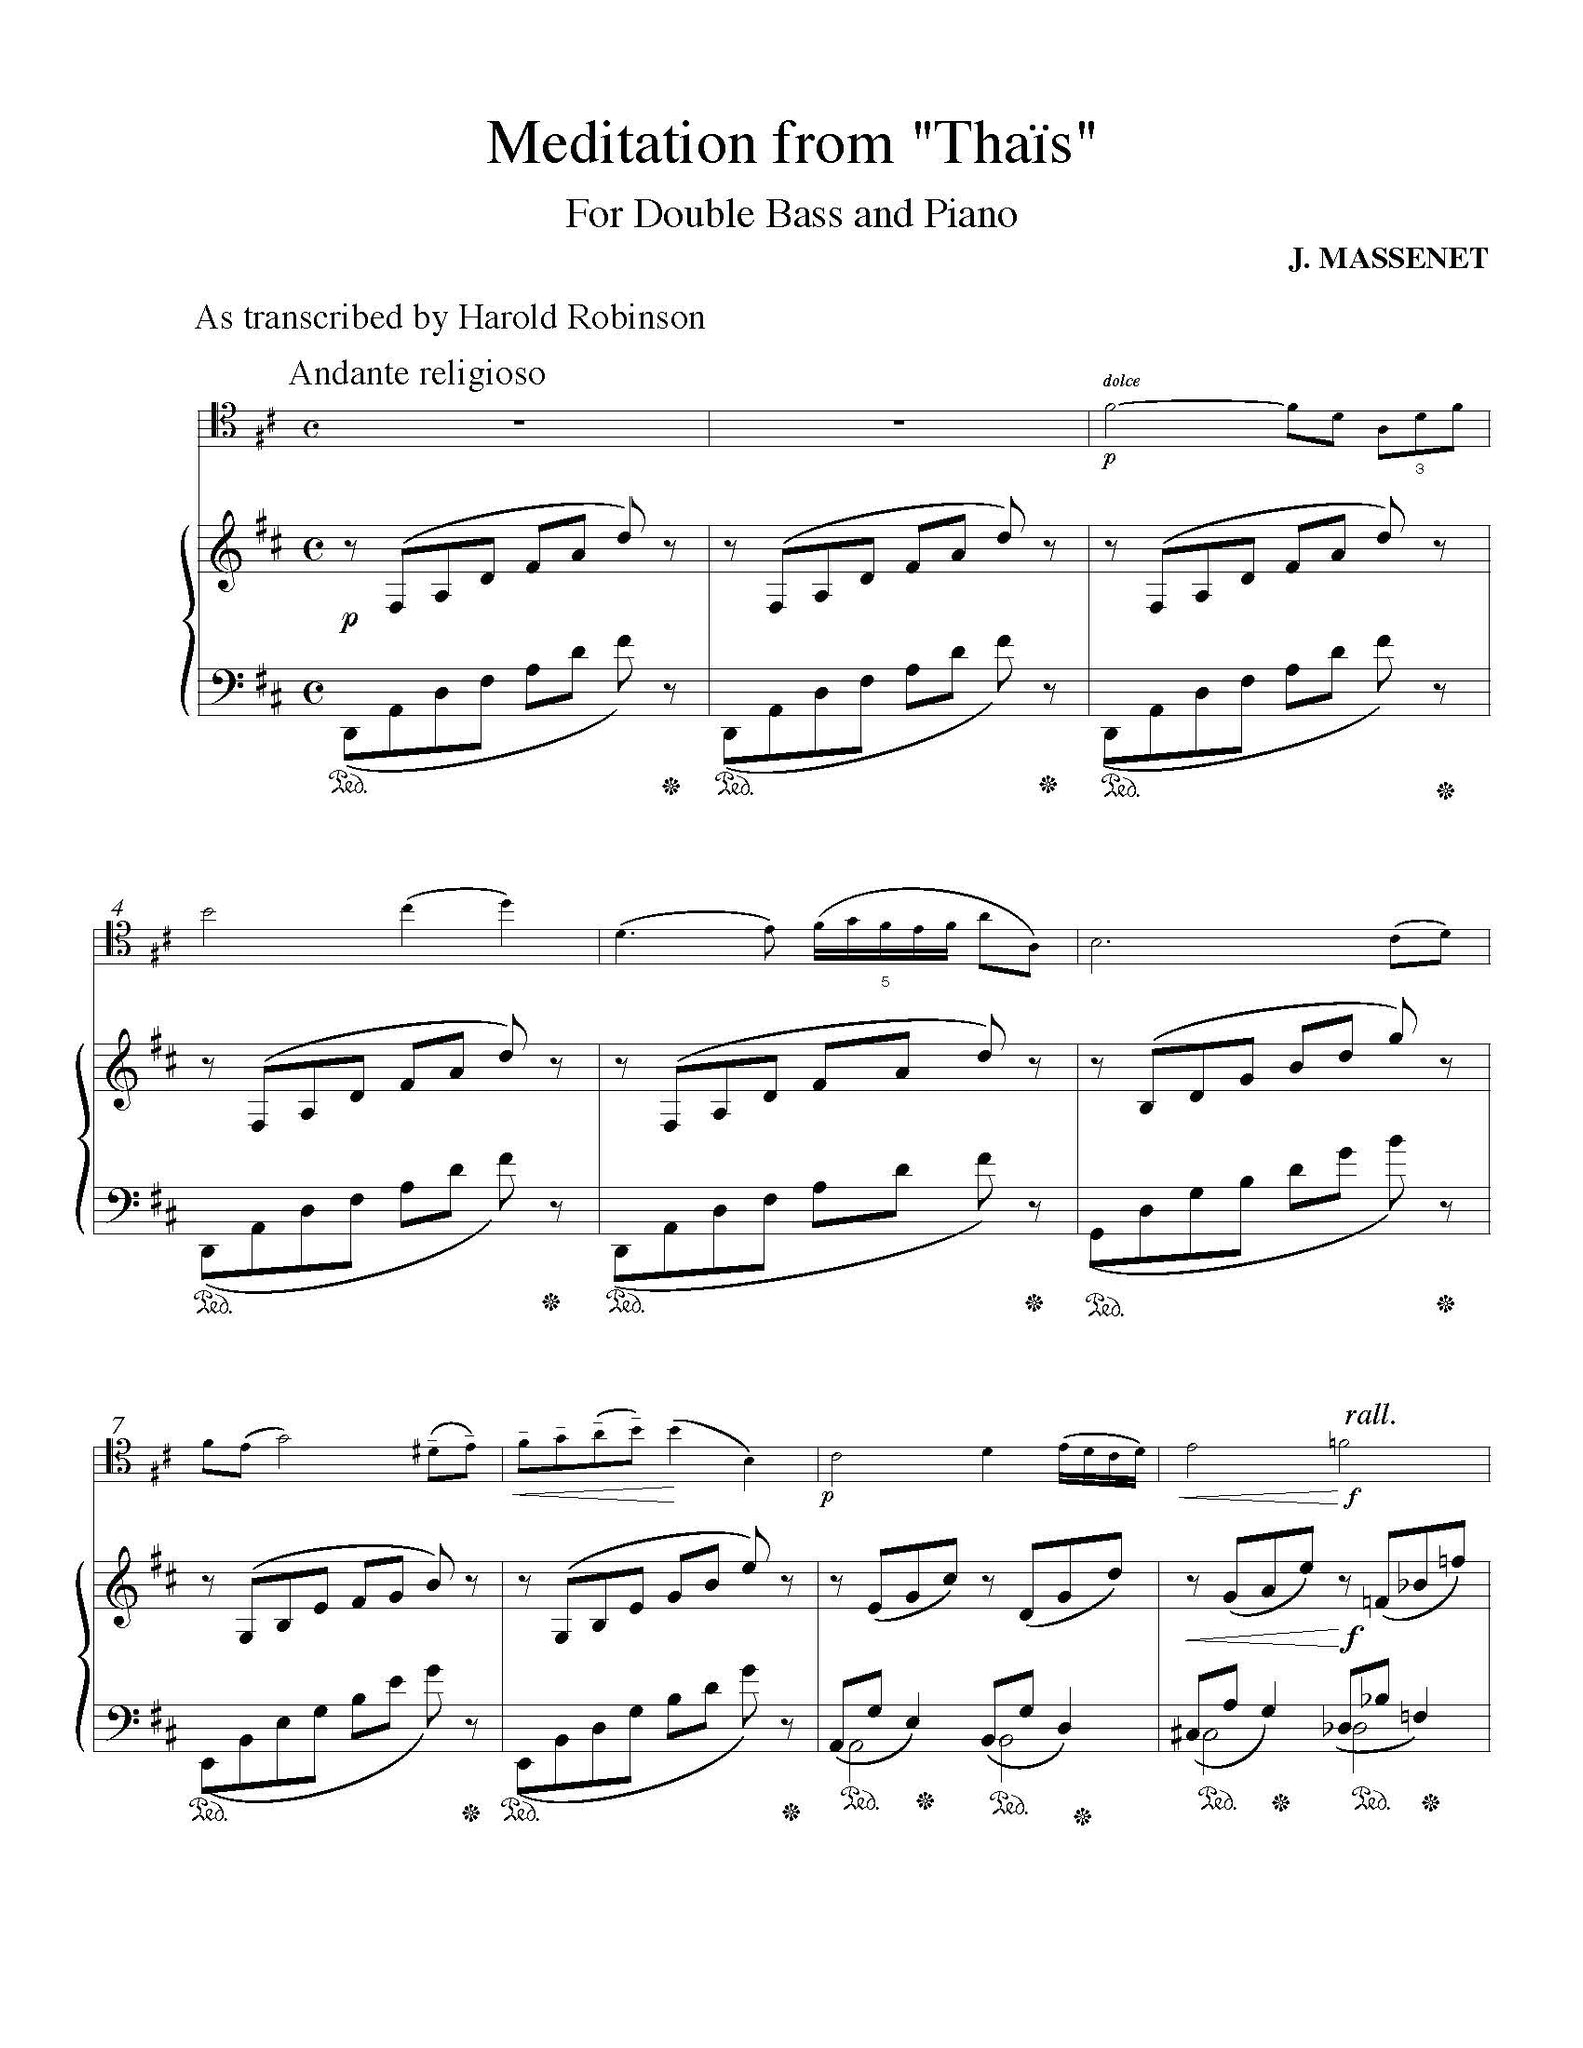 Massenet D Major orchestra tuning page 1